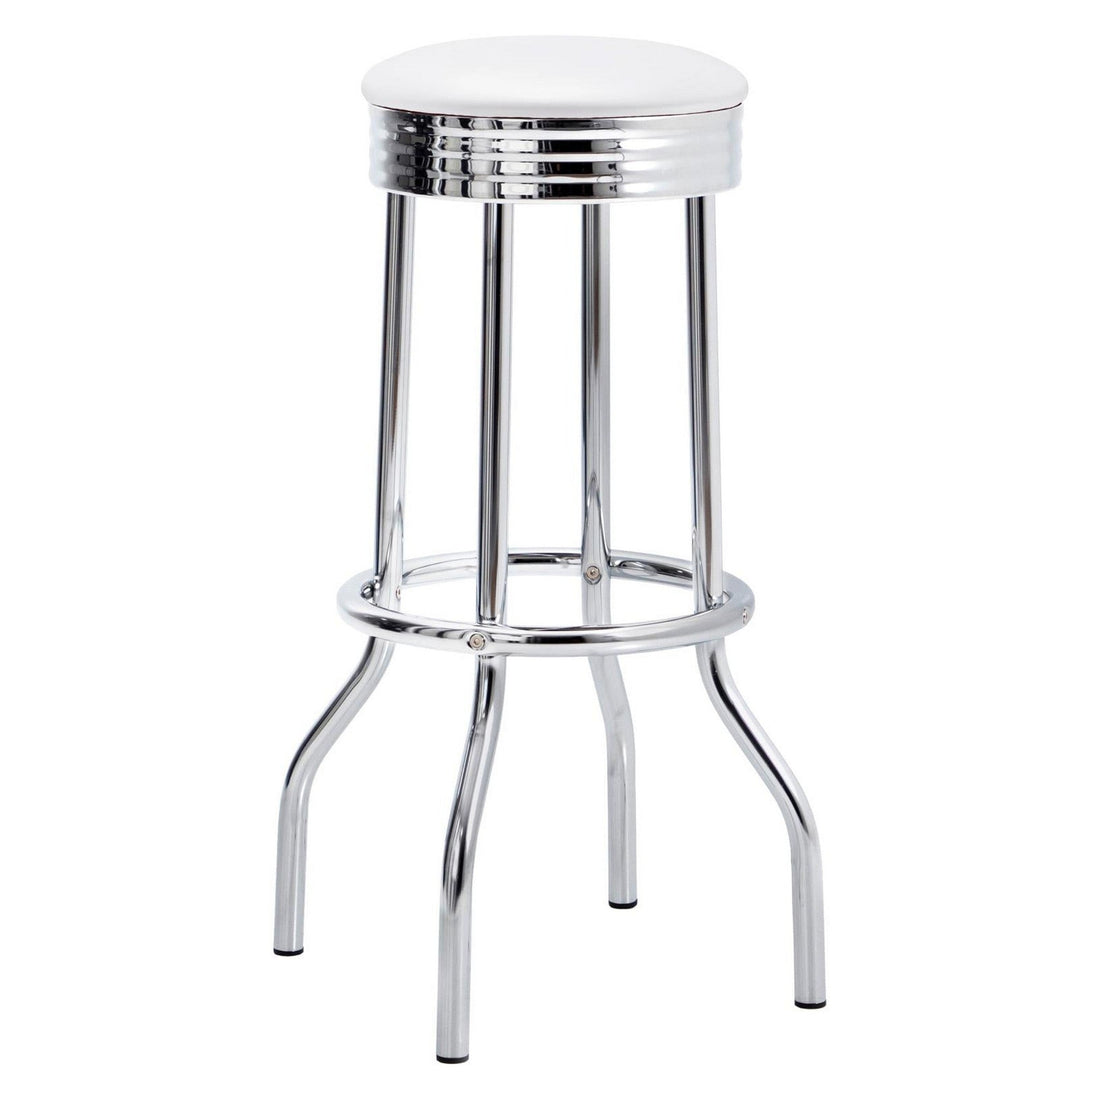 Theodore Upholstered Top Bar Stools White and Chrome (Set of 2) 2299W